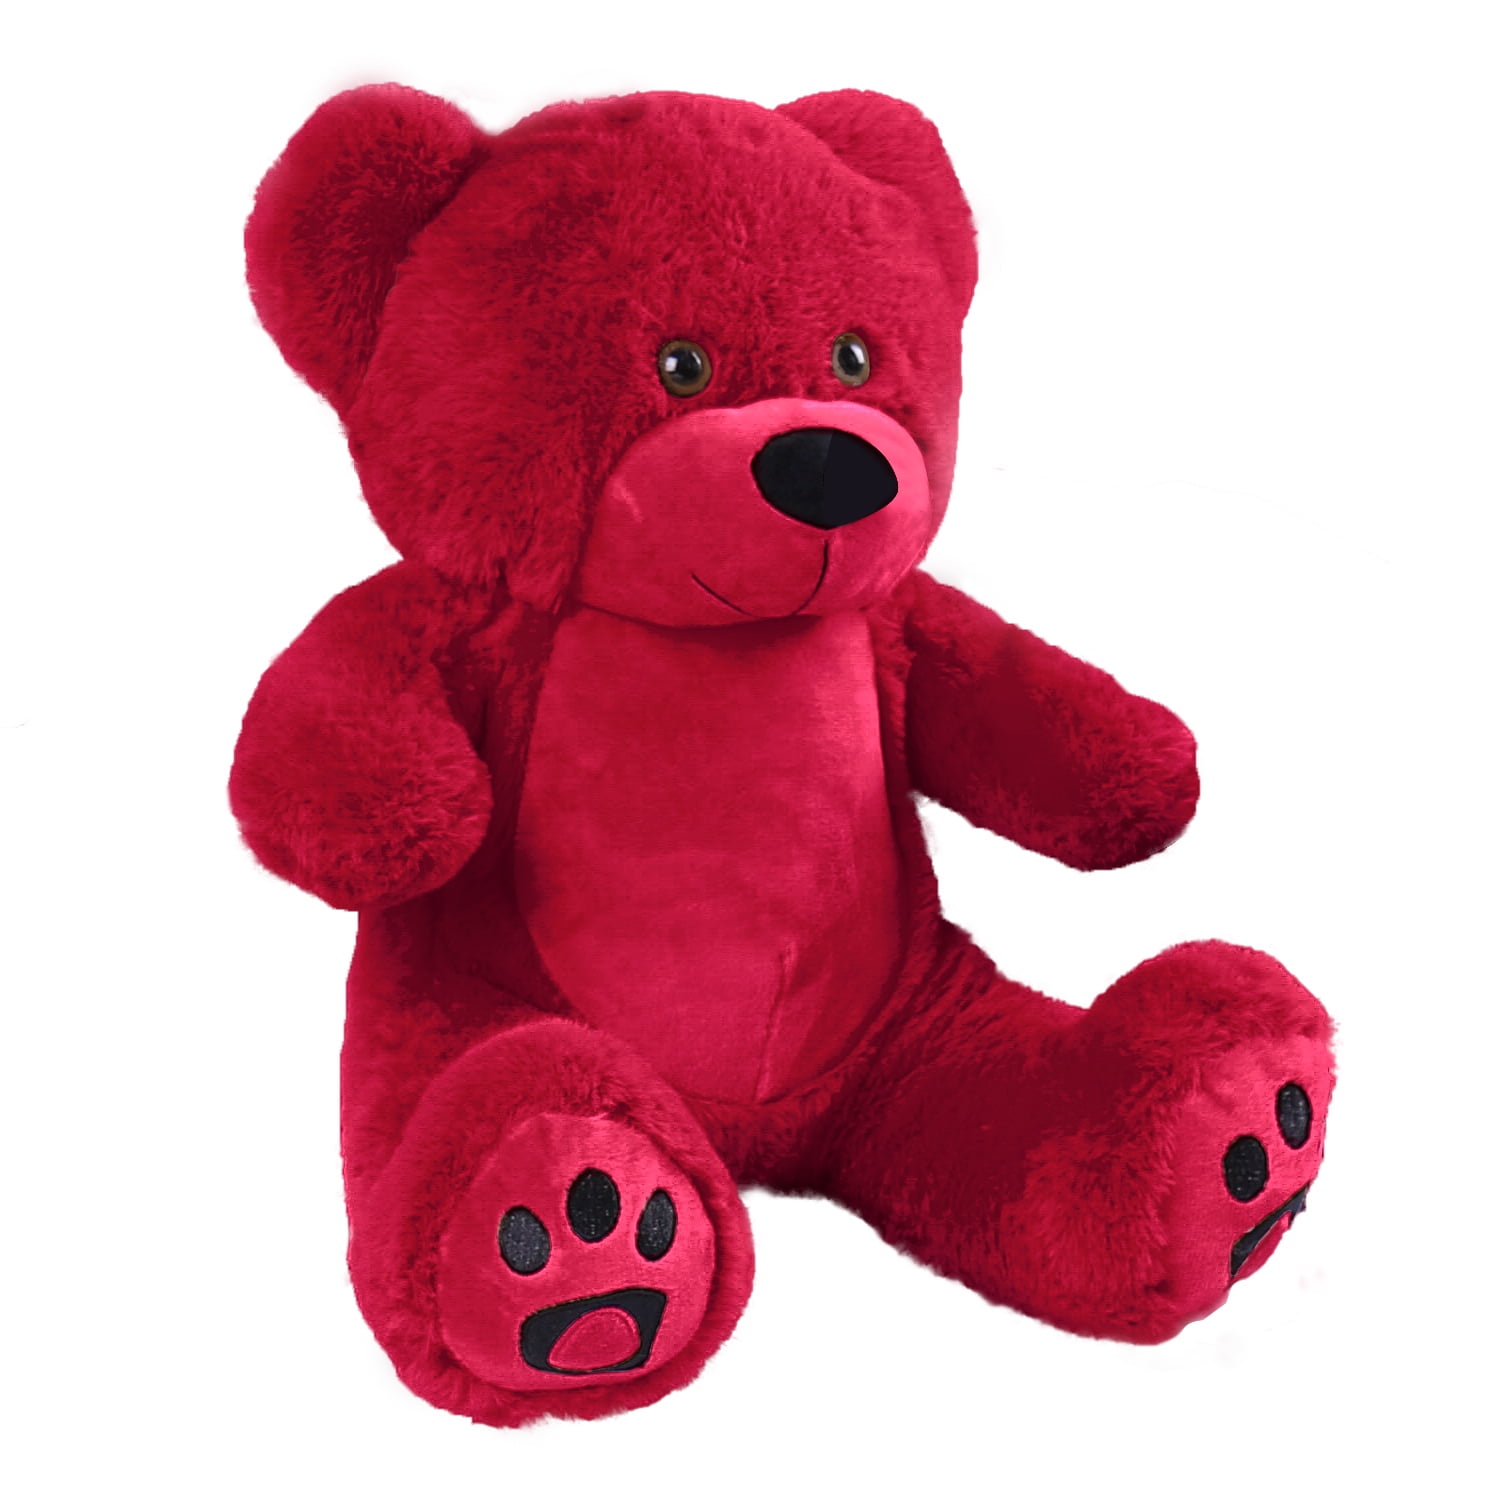 Details about   Jumbo Giant 78in Teddy Bear Stuffed plush animal toys Valentines Birthday gifts